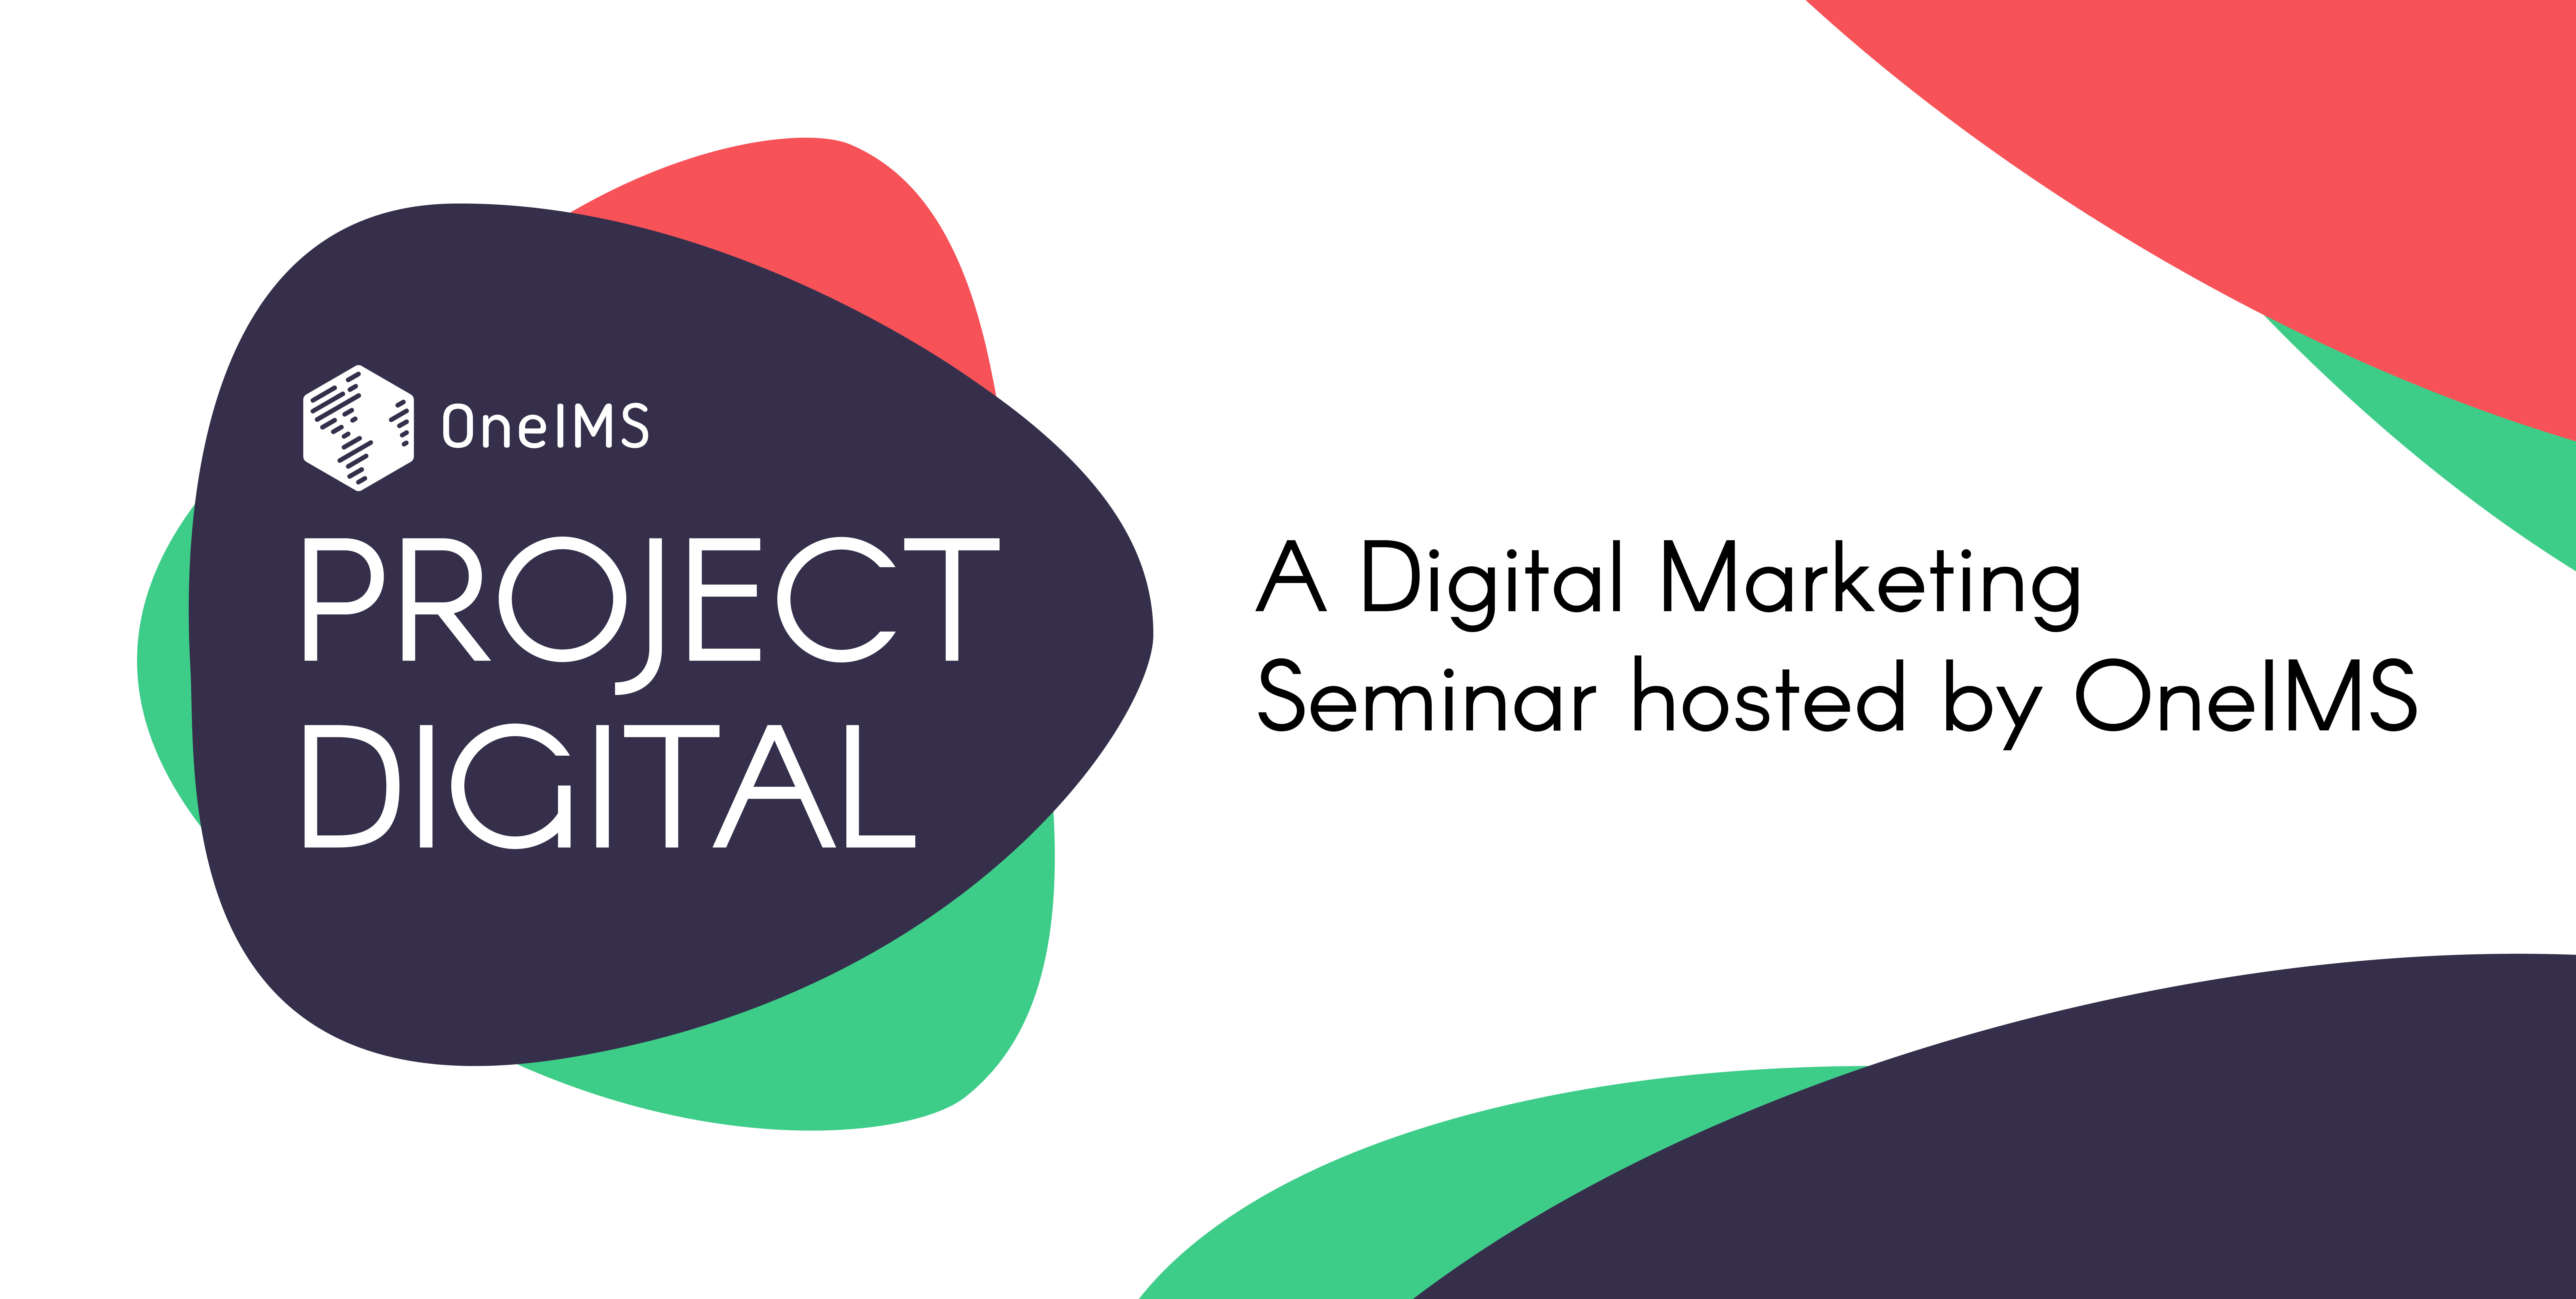 Project Digital - A FREE Digital Marketing Seminar for Business Owners